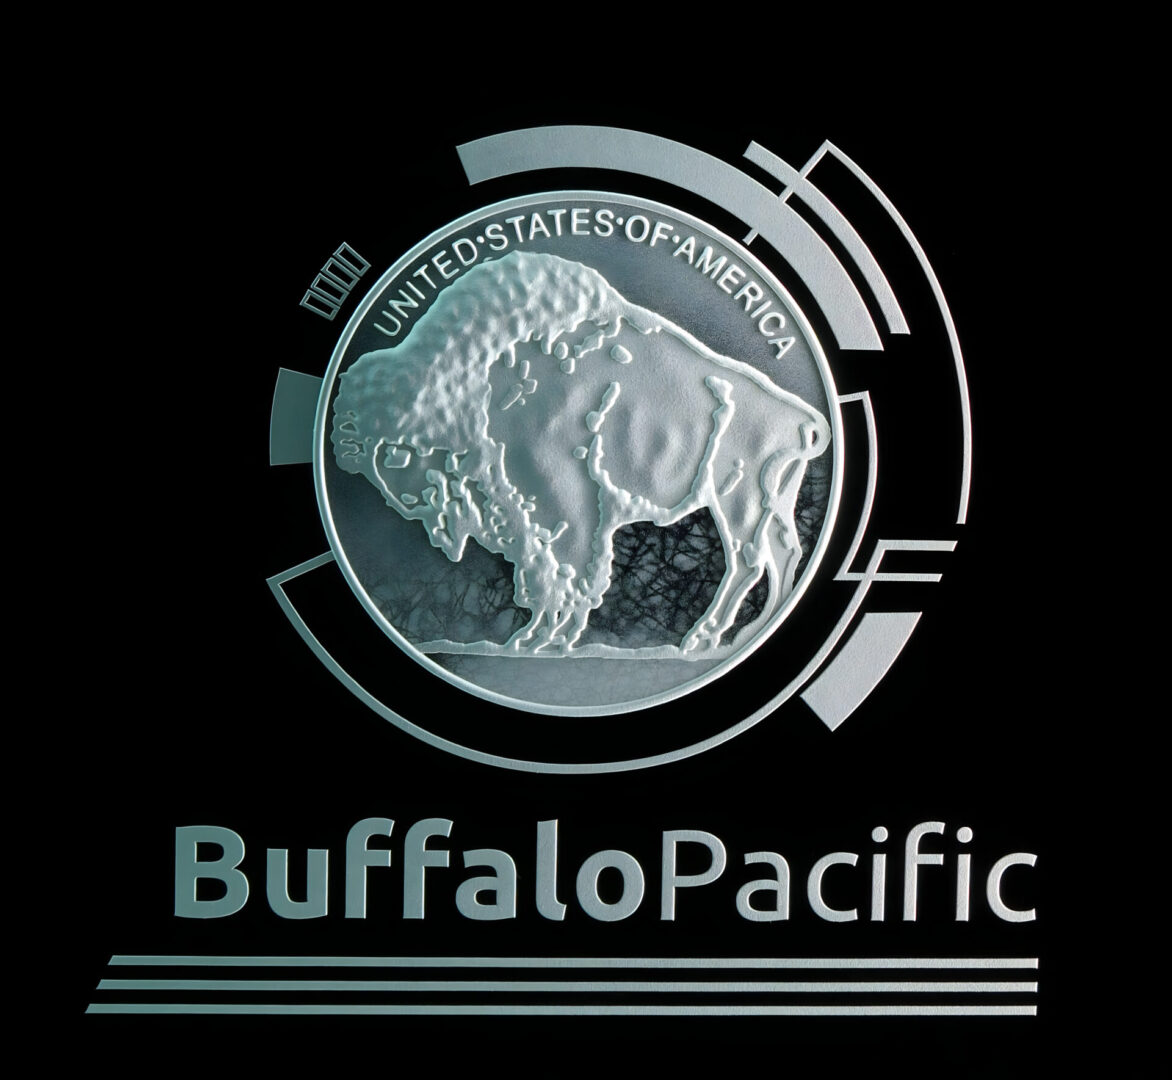 A logo featuring a stylized buffalo within a circular frame, with the text "united states of america" above and "buffalo pacific" below.